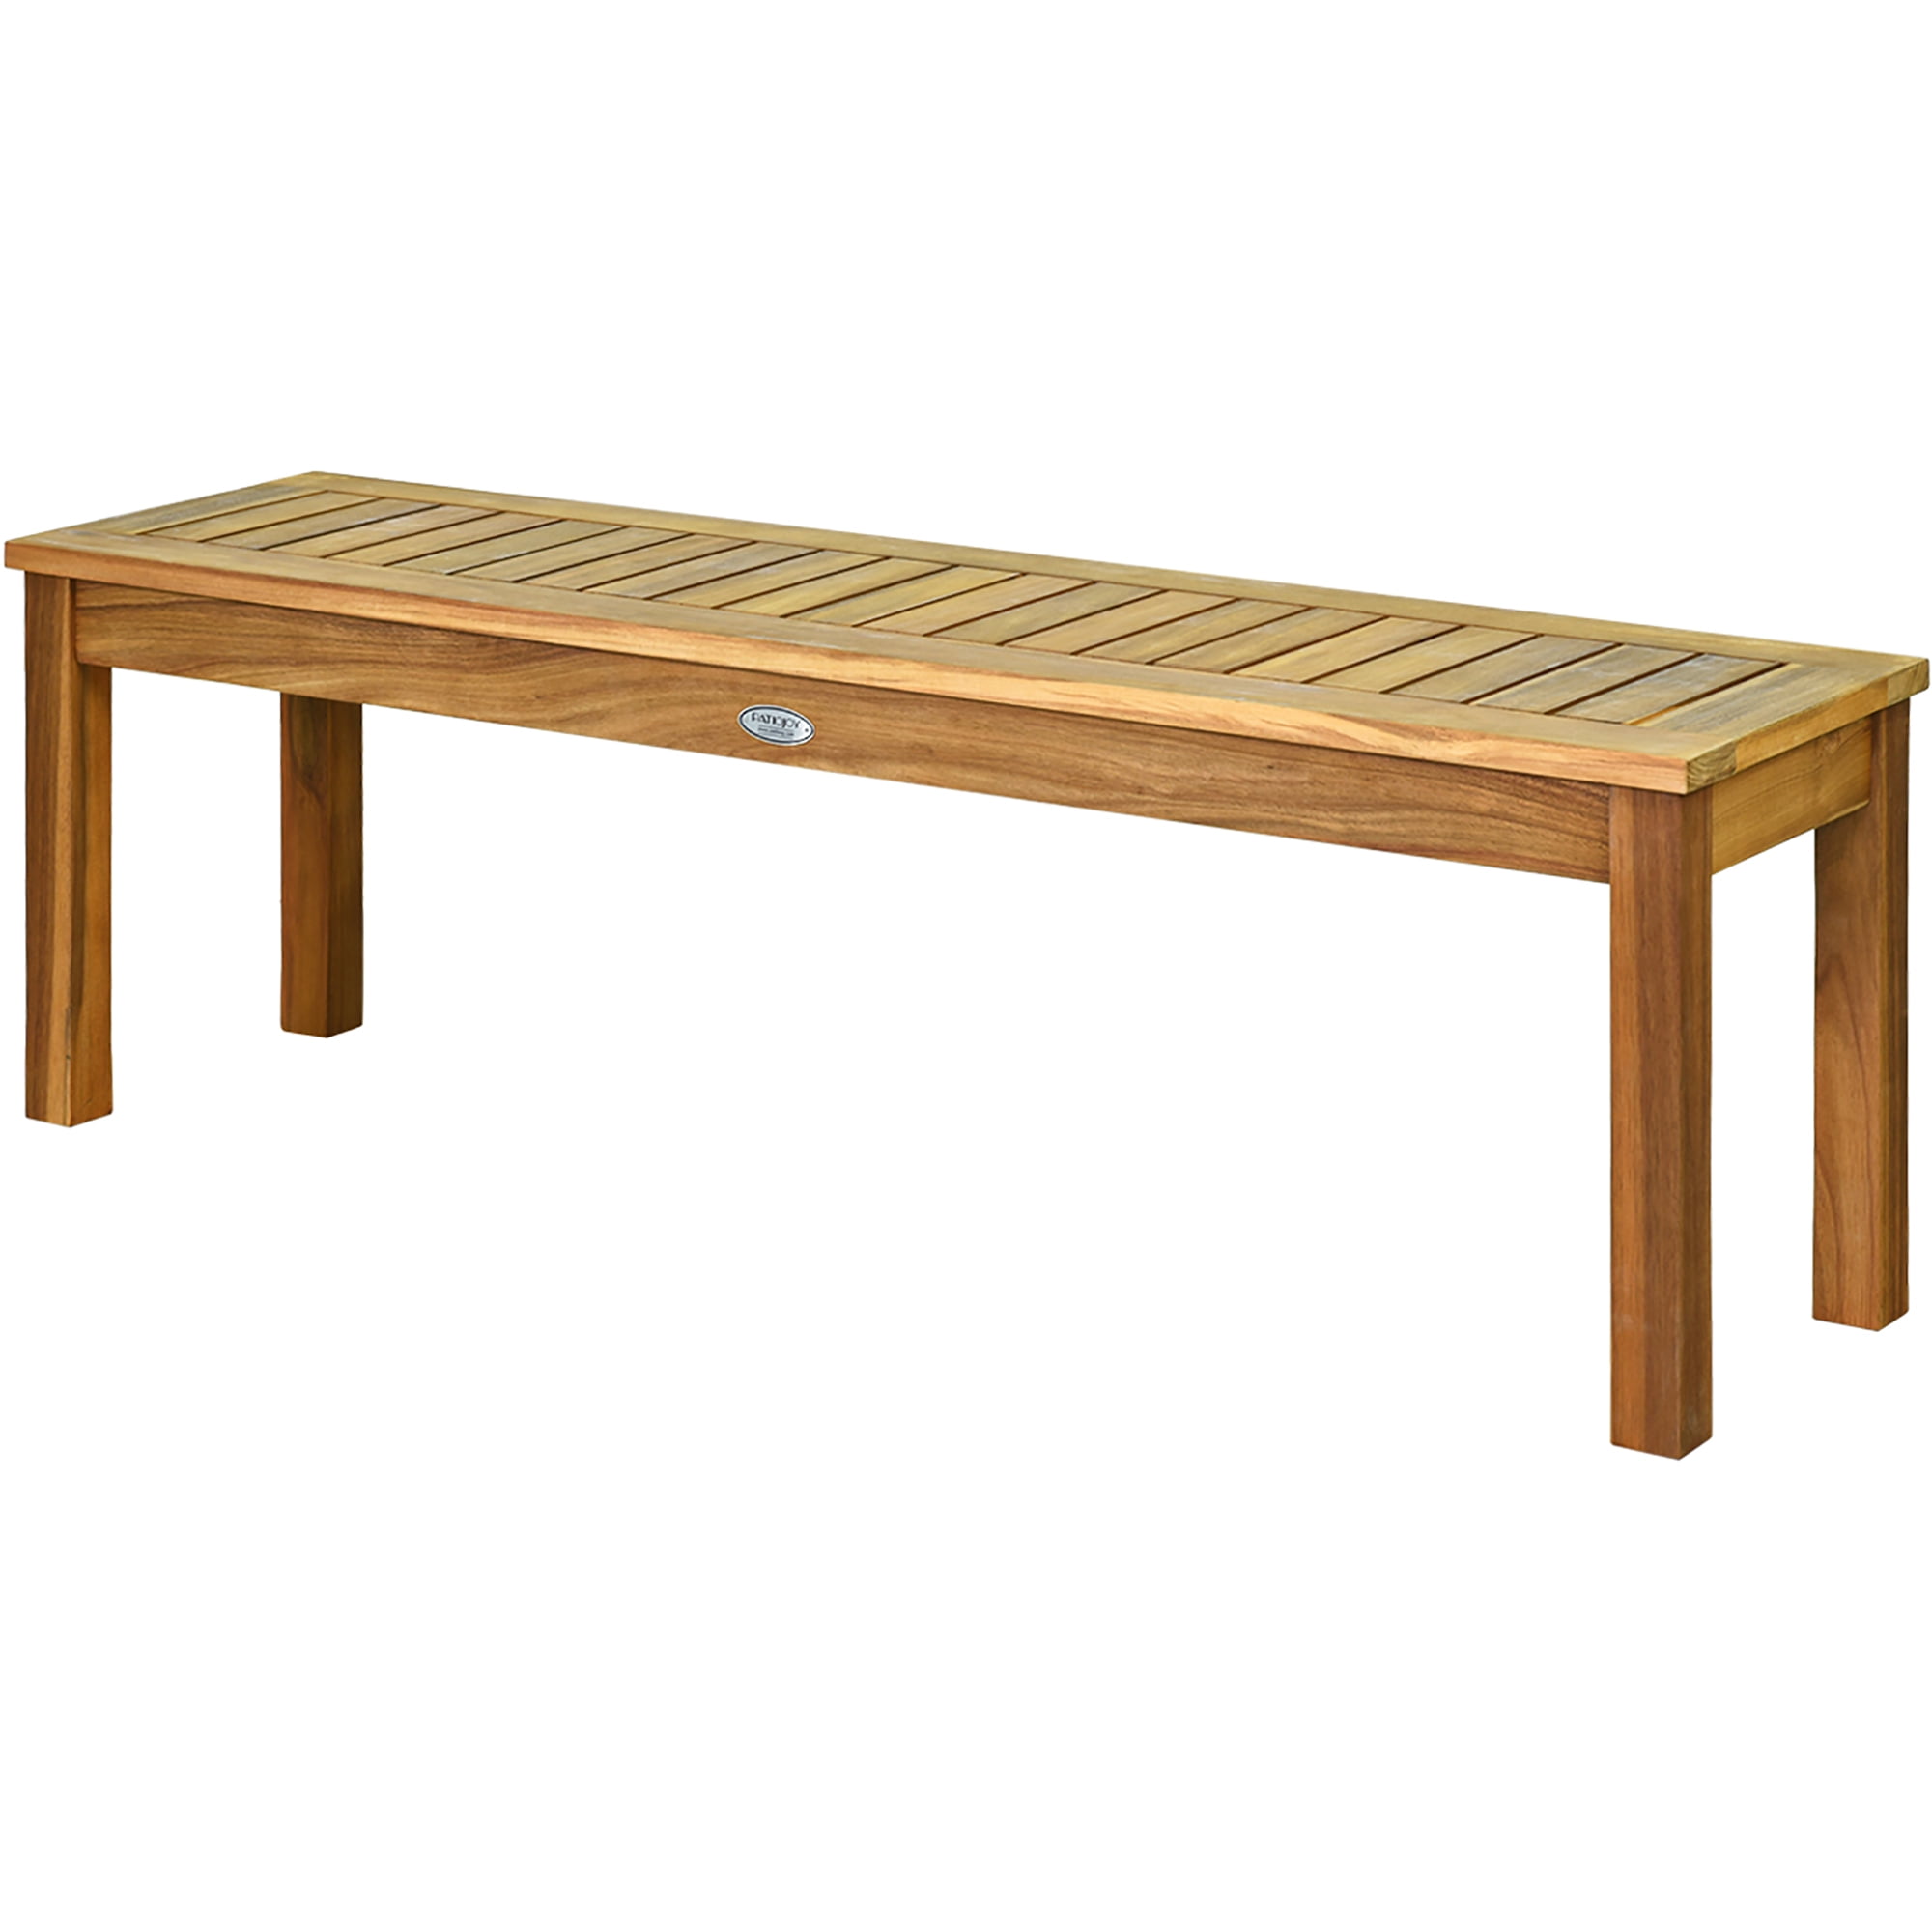 1, Teak Patio Backless Dining Bench with Slatted Seat Wood Bench for Dining Room Entryway Poolside Garden Tangkula 52 Inches Acacia Wood Outdoor Bench Ideal for Outdoors & Indoors 